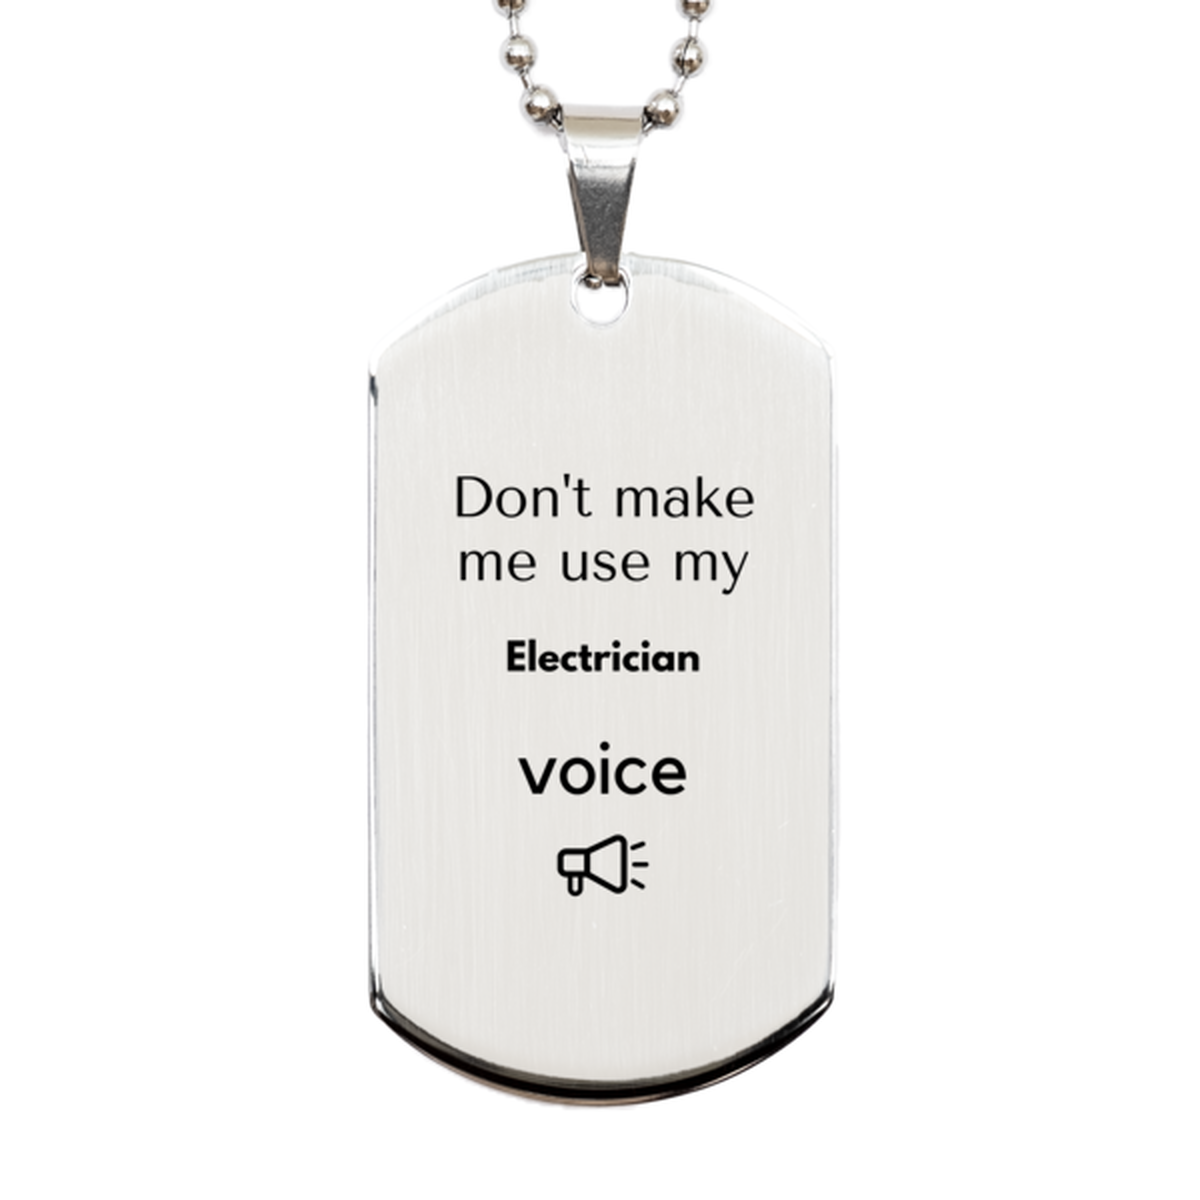 Don't make me use my Electrician voice, Sarcasm Electrician Gifts, Christmas Electrician Silver Dog Tag Birthday Unique Gifts For Electrician Coworkers, Men, Women, Colleague, Friends